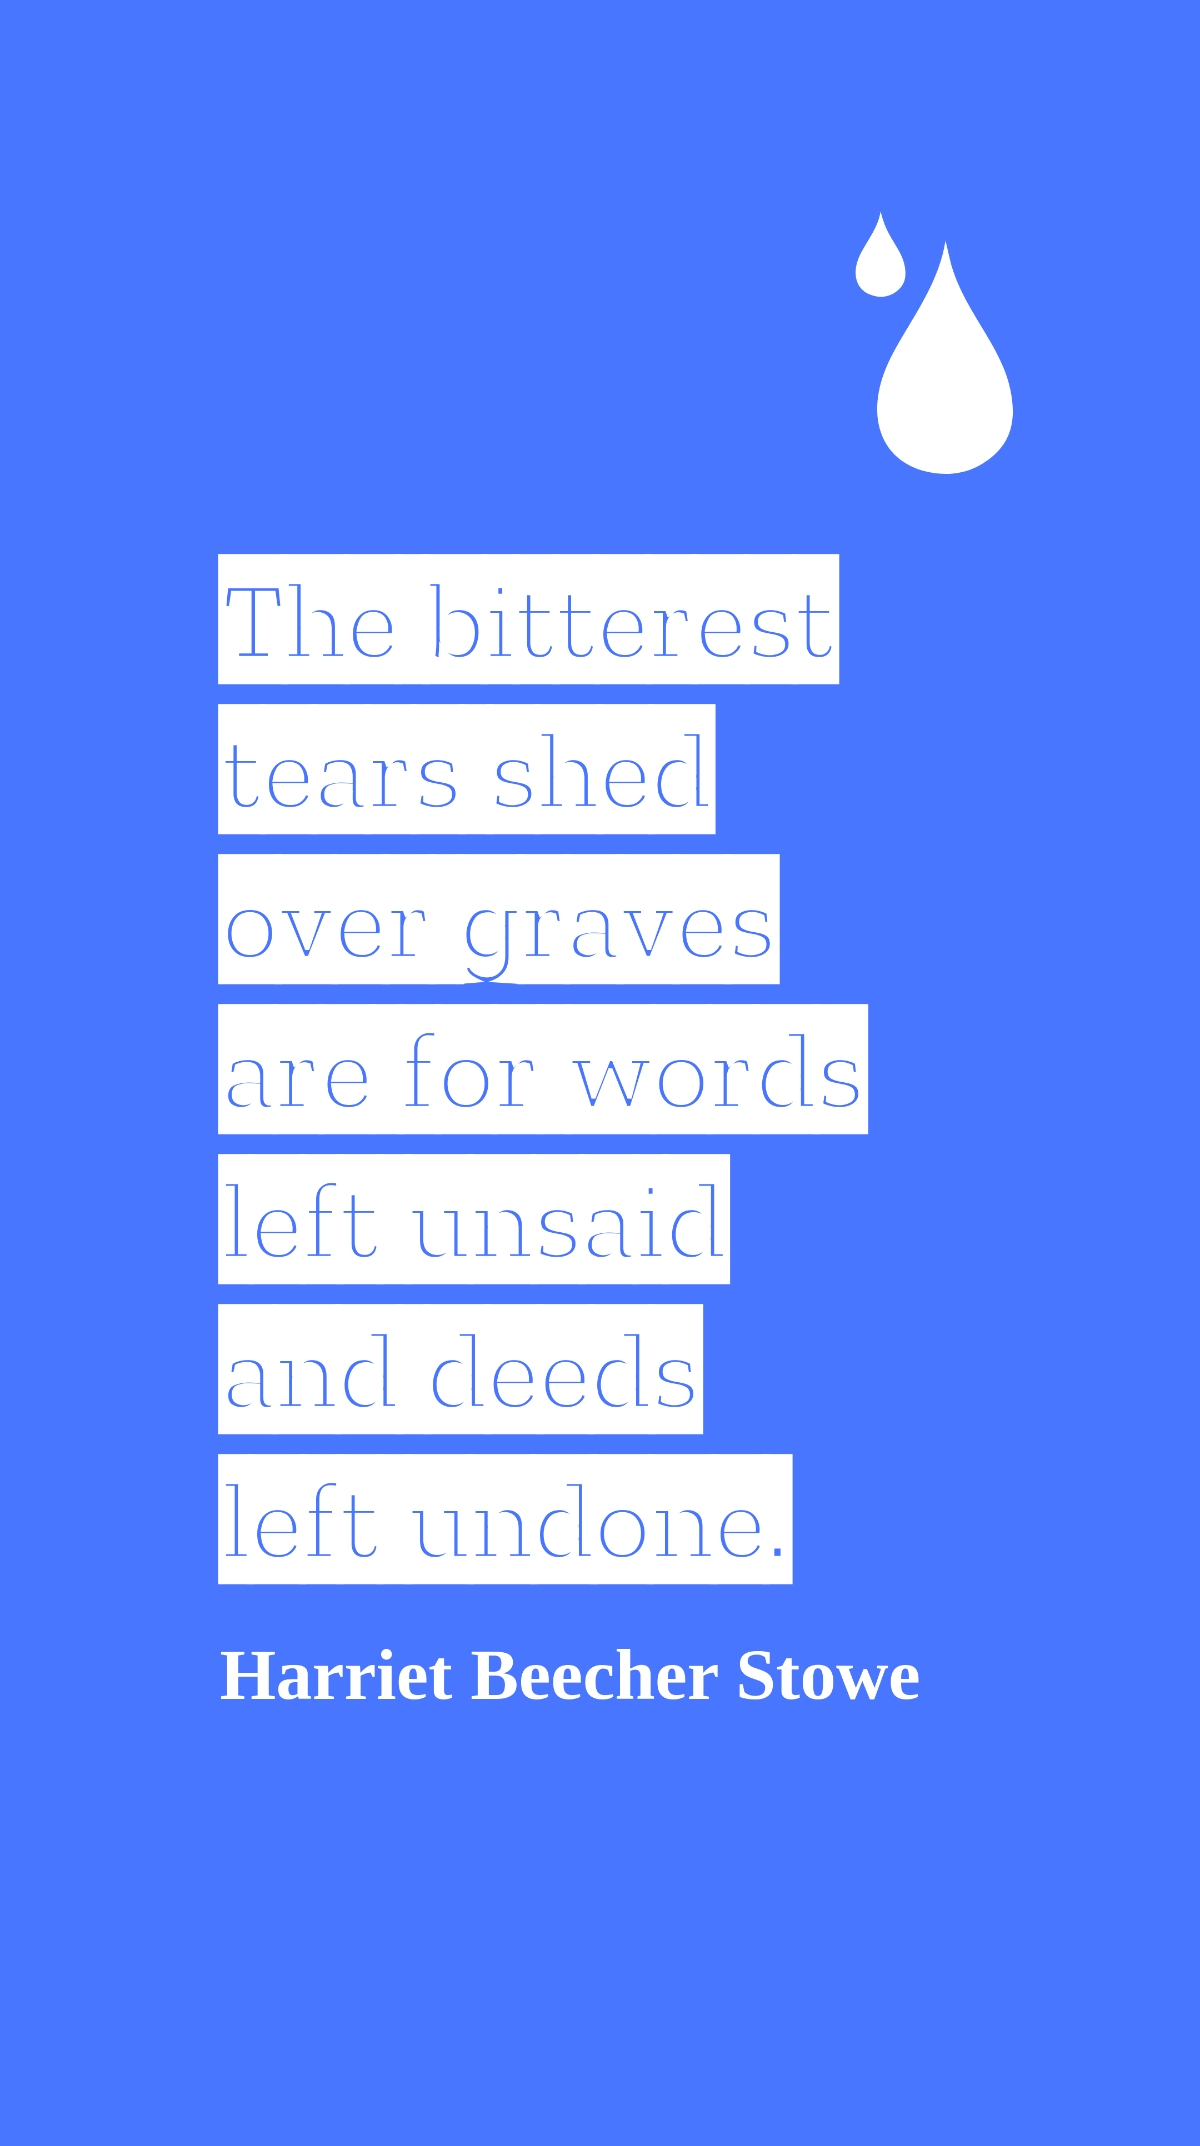 Free Harriet Beecher Stowe - The bitterest tears shed over graves are for words left unsaid and deeds left undone. Template